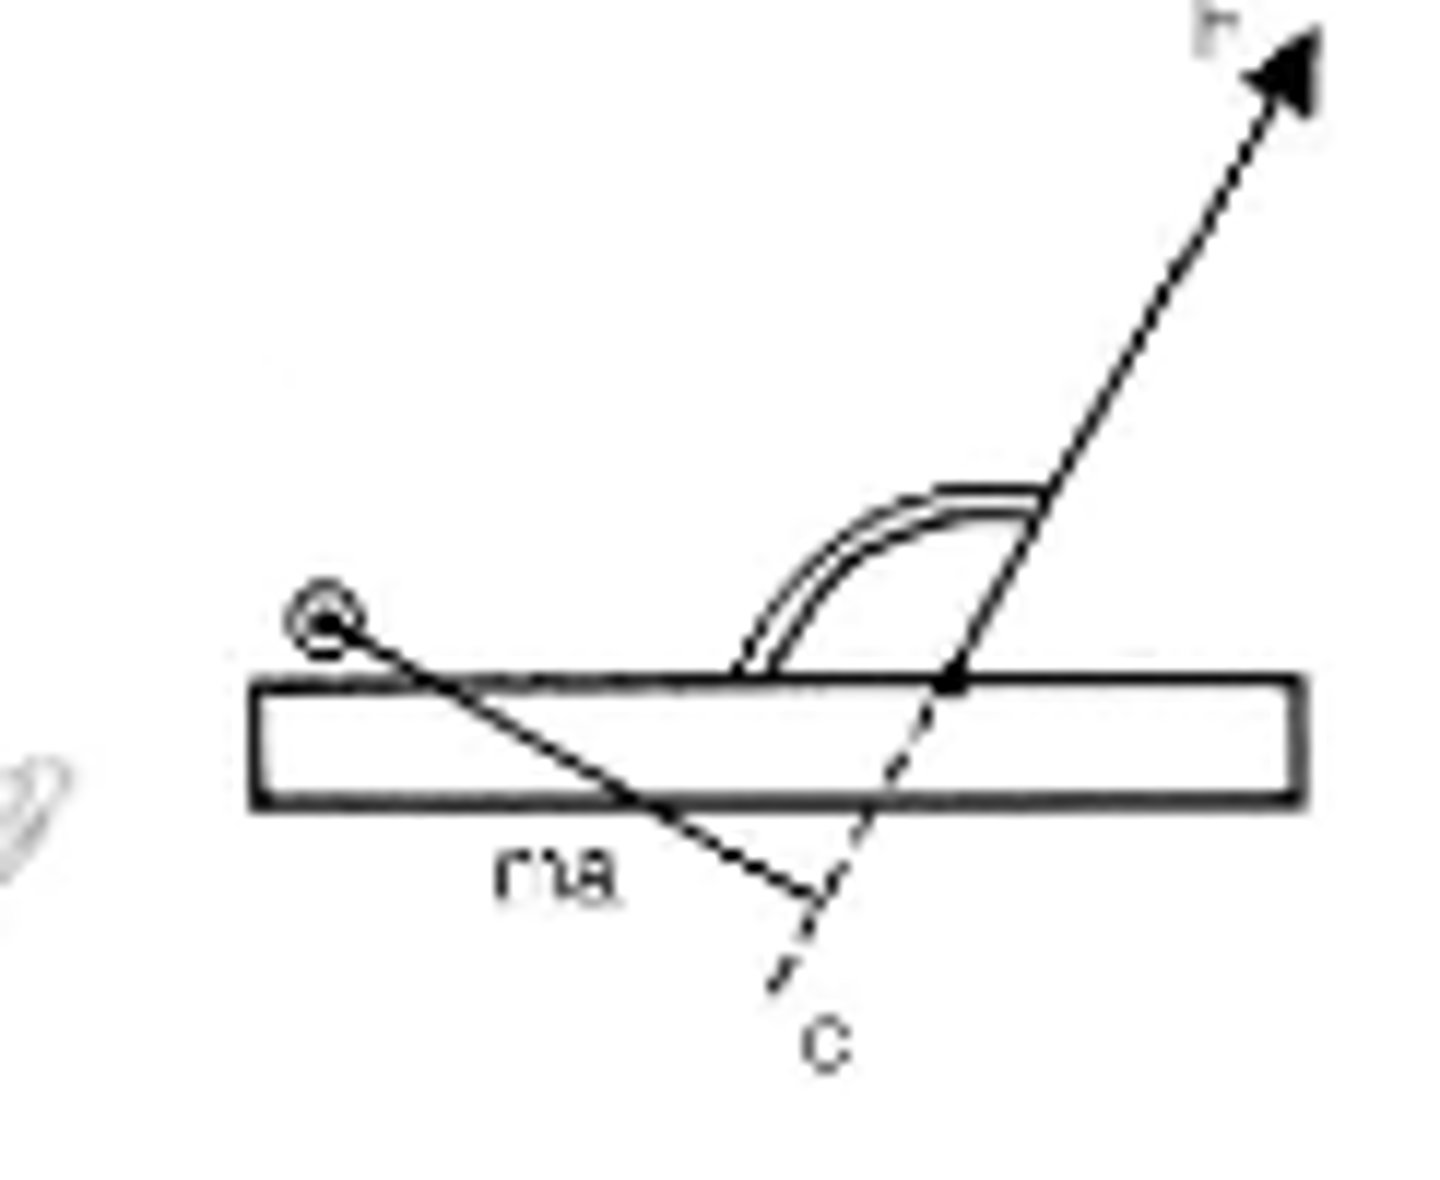 <p>Can the moment arm line of action extended past the segment?</p>